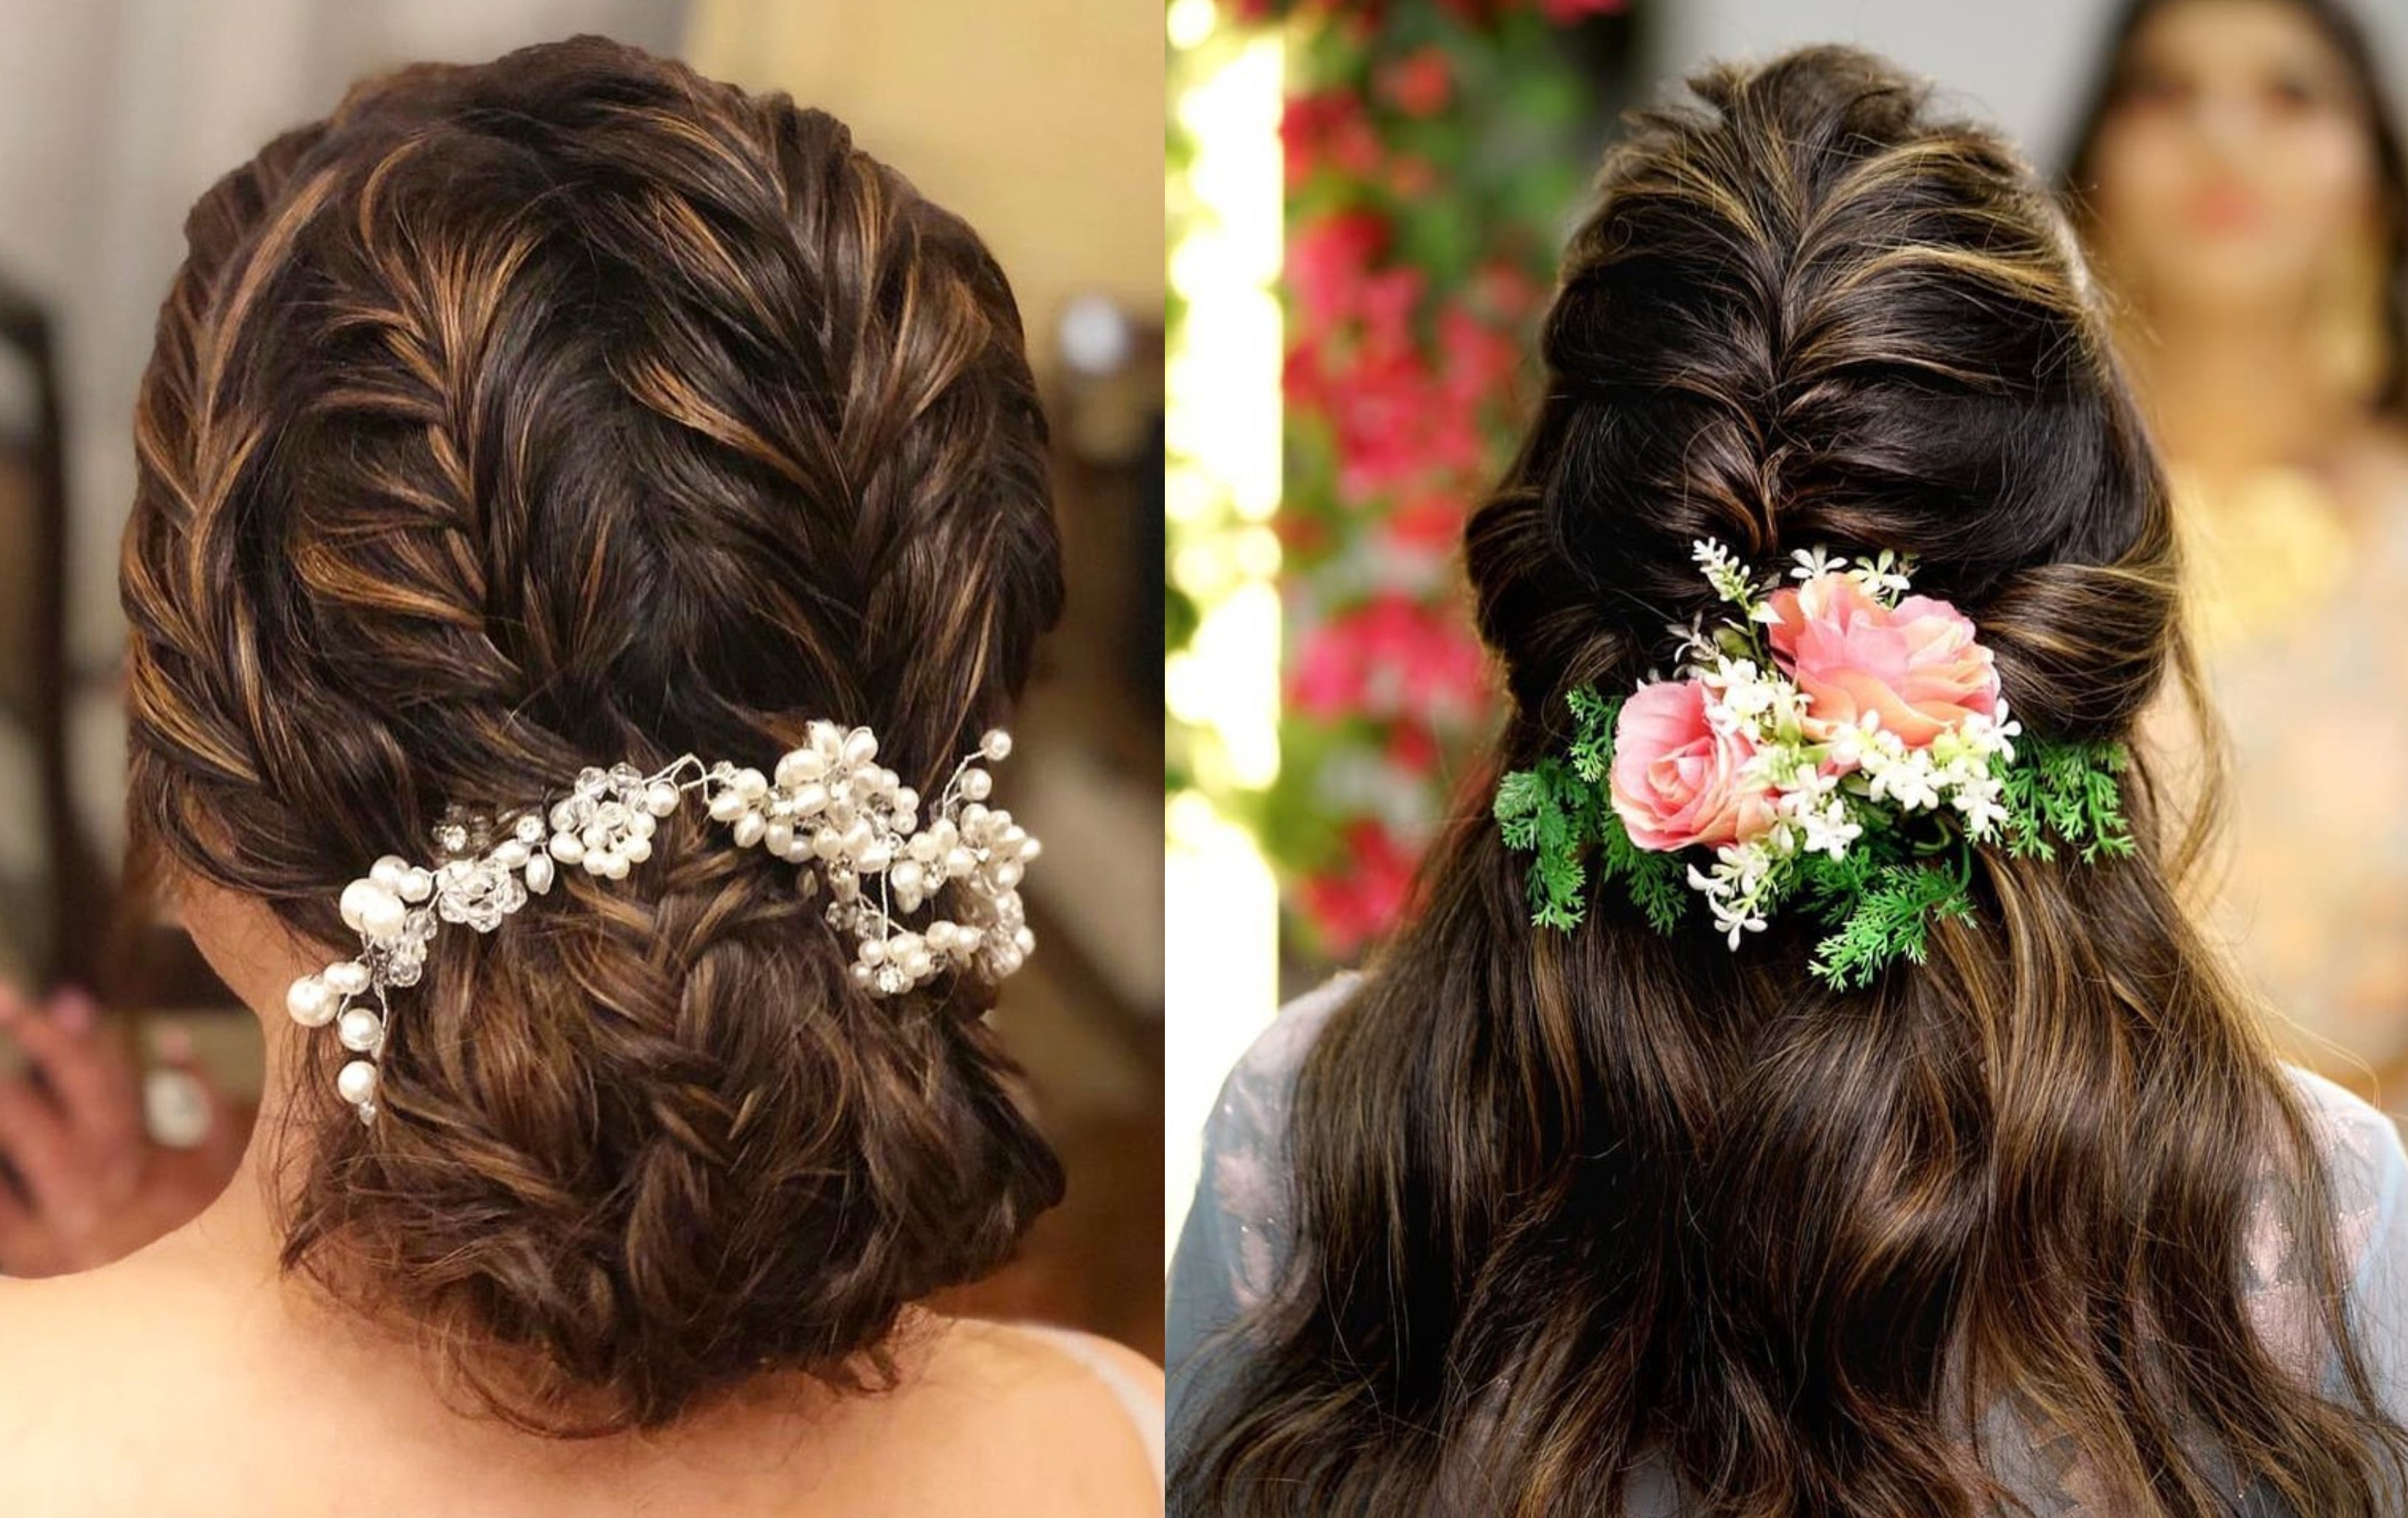 25 Beach Wedding Hairstyles for Brides, Bridesmaids, and Guests